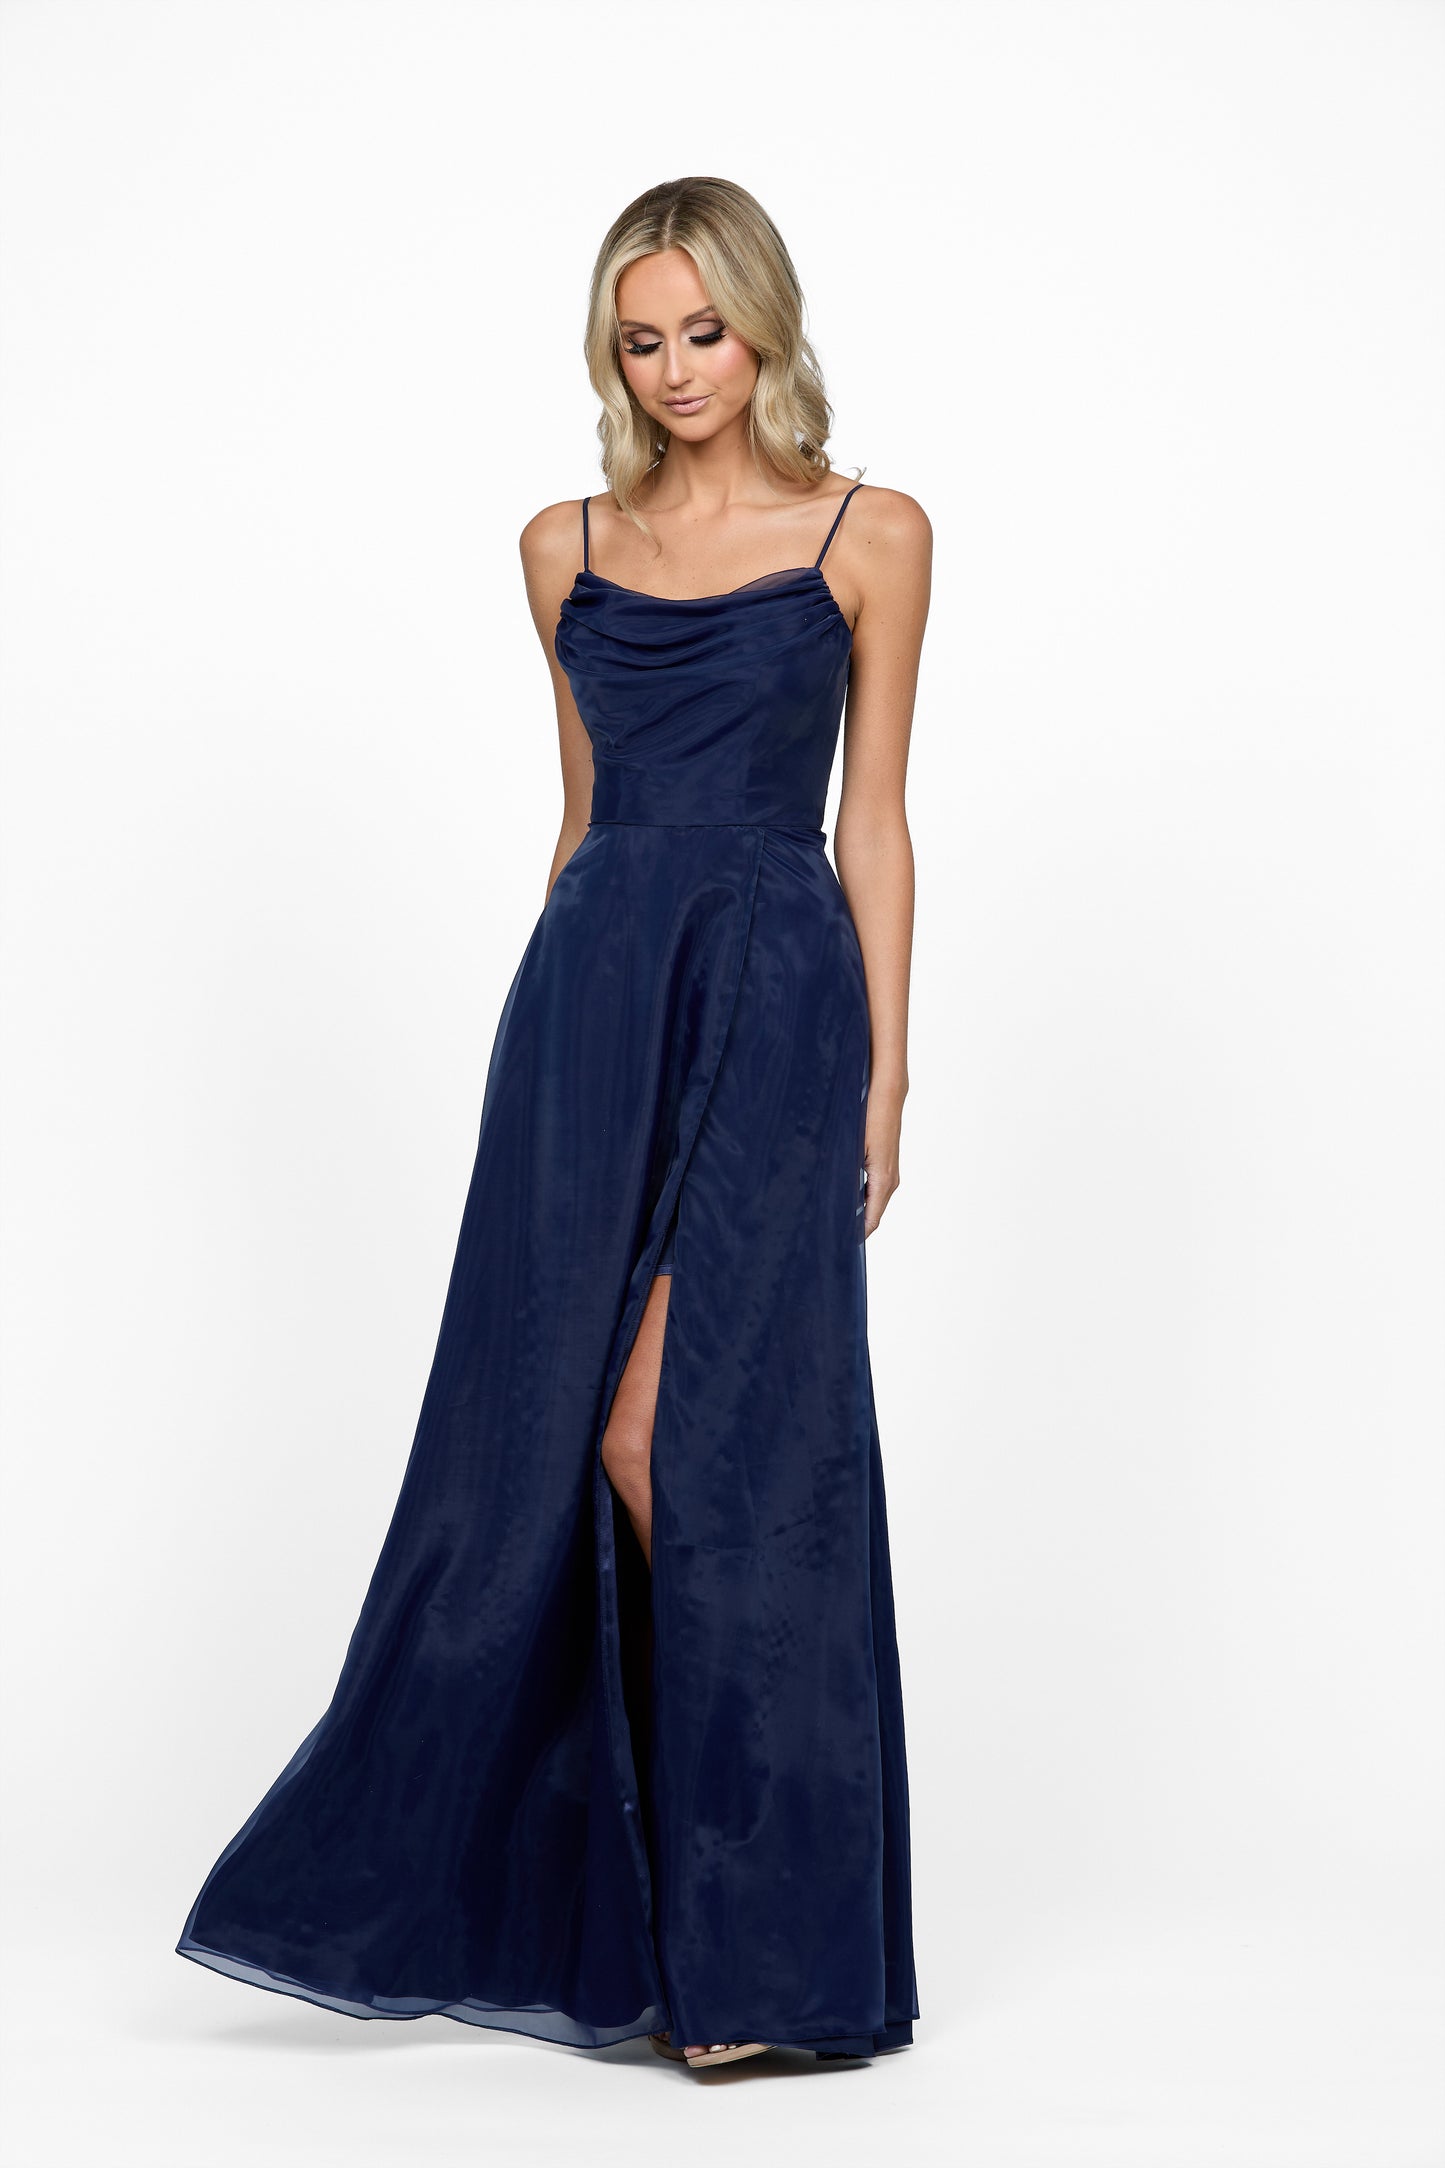 Averie Cowl Neck Gown